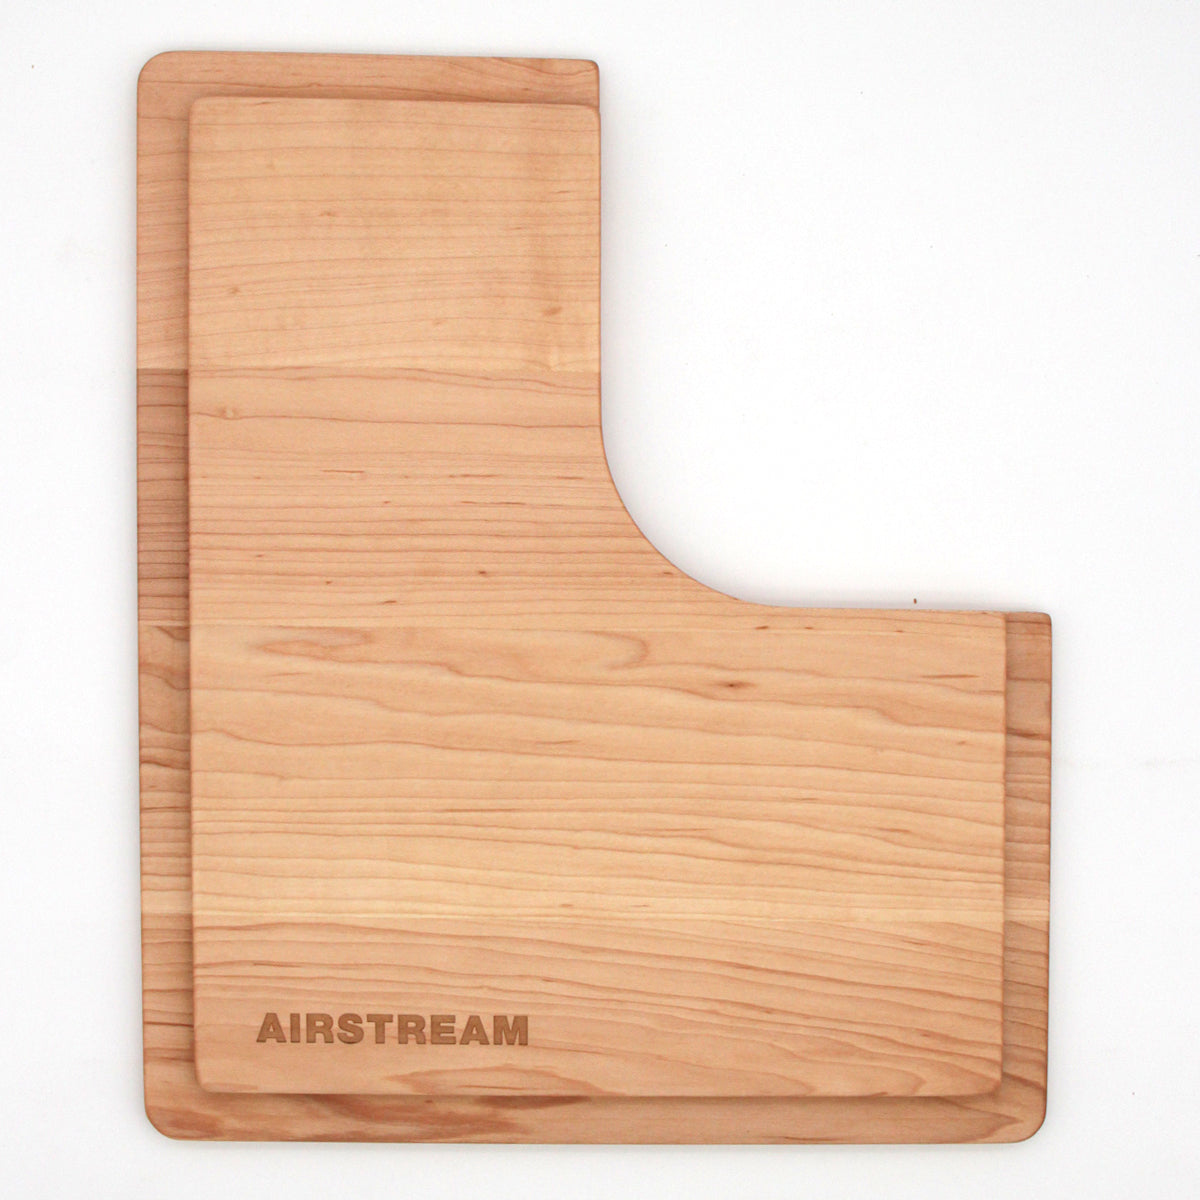 Wood Sink Cutting Boards for Pendleton Trailers